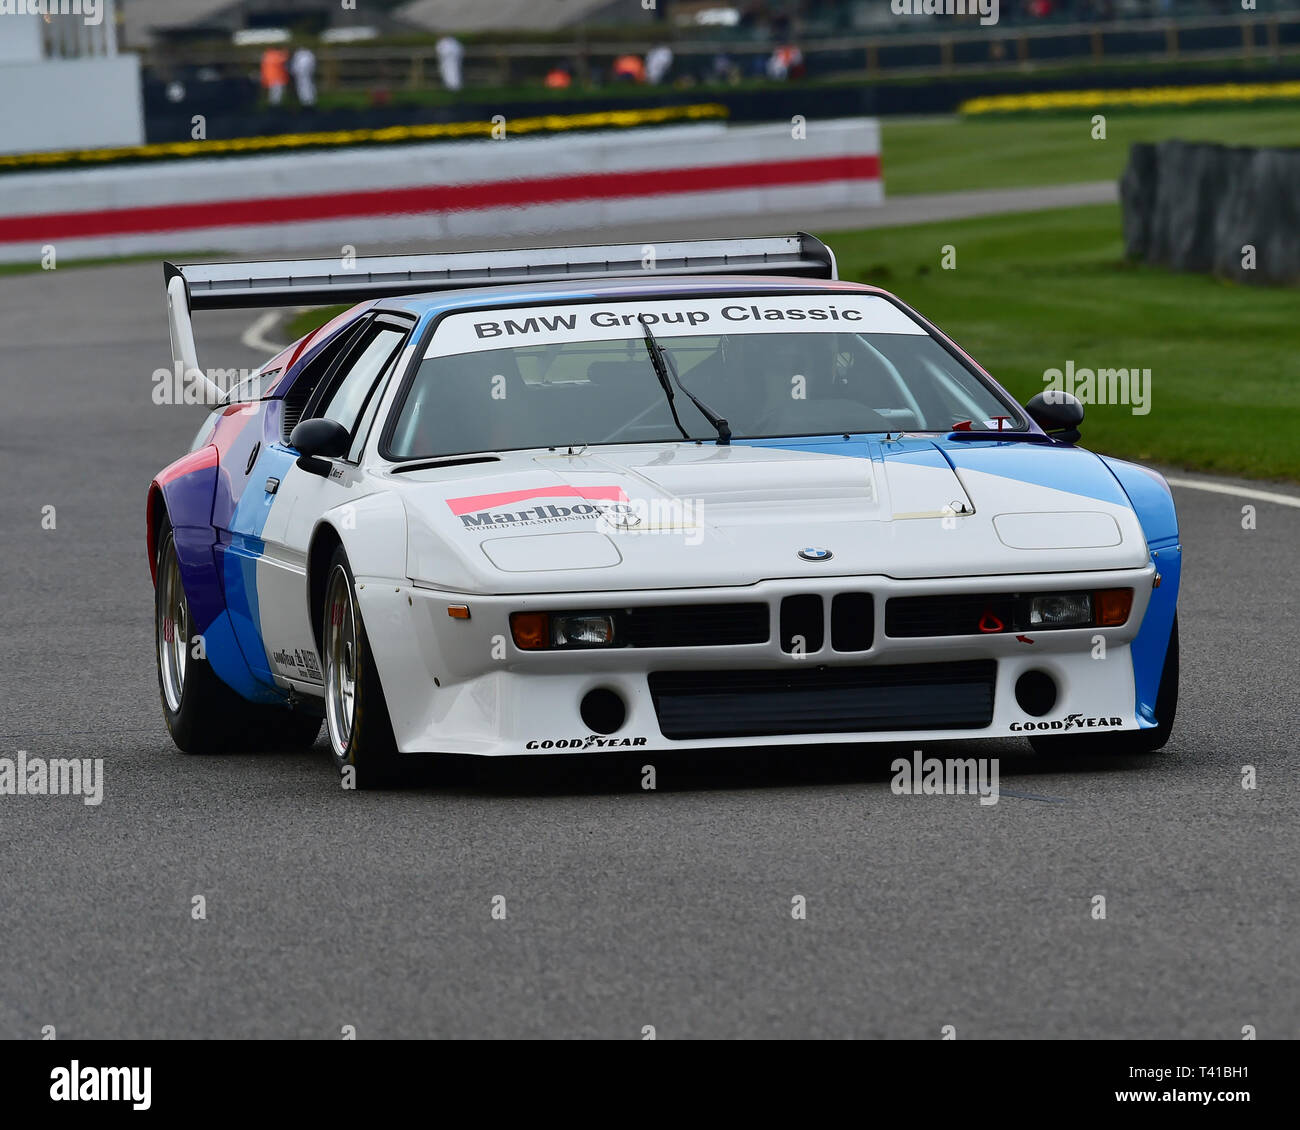 BMW M1 Procar, 77th Members Meeting, Goodwood, West Sussex, England, April 2019, Autosport, cars, circuit racing, classic cars, competition, England,  Stock Photo